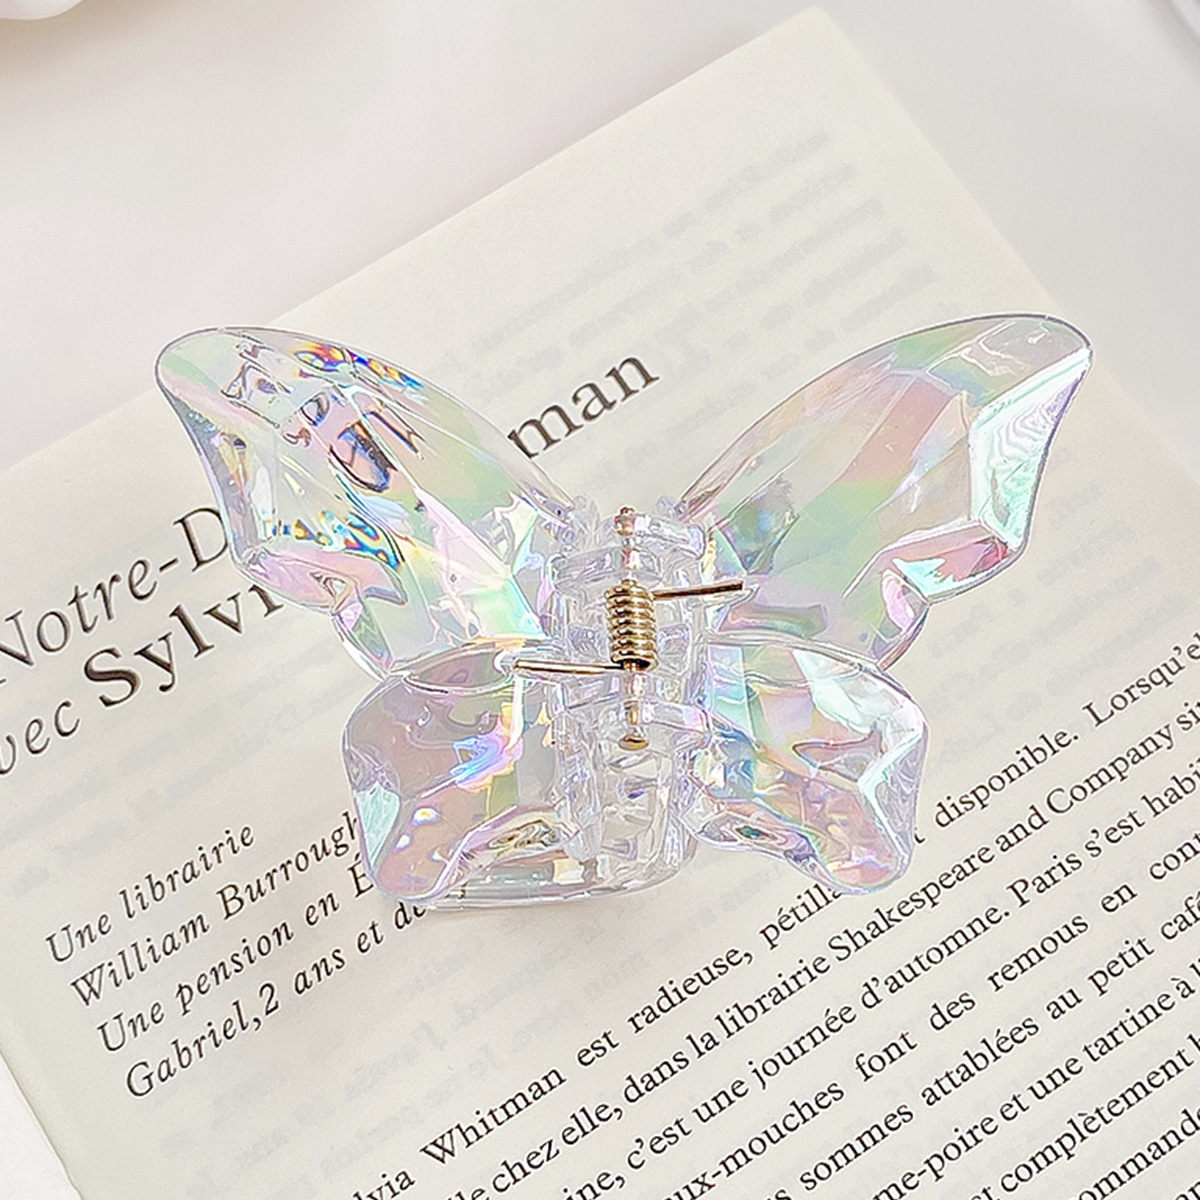 Crystal butterfly